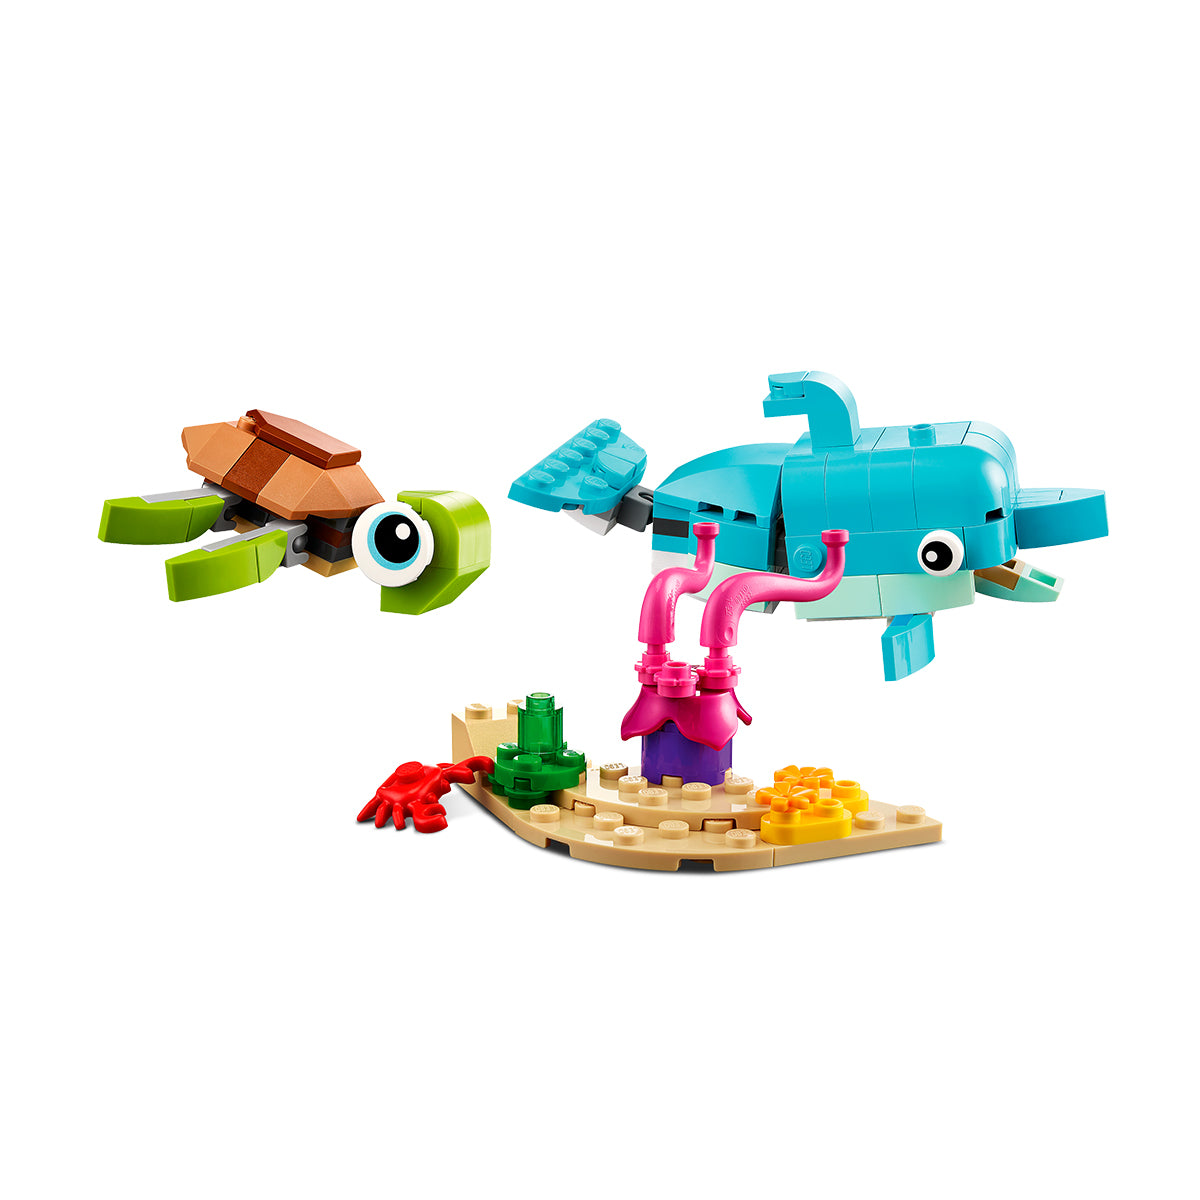 LEGO Creator 3 In 1 - Dolphin and Turtle 31128